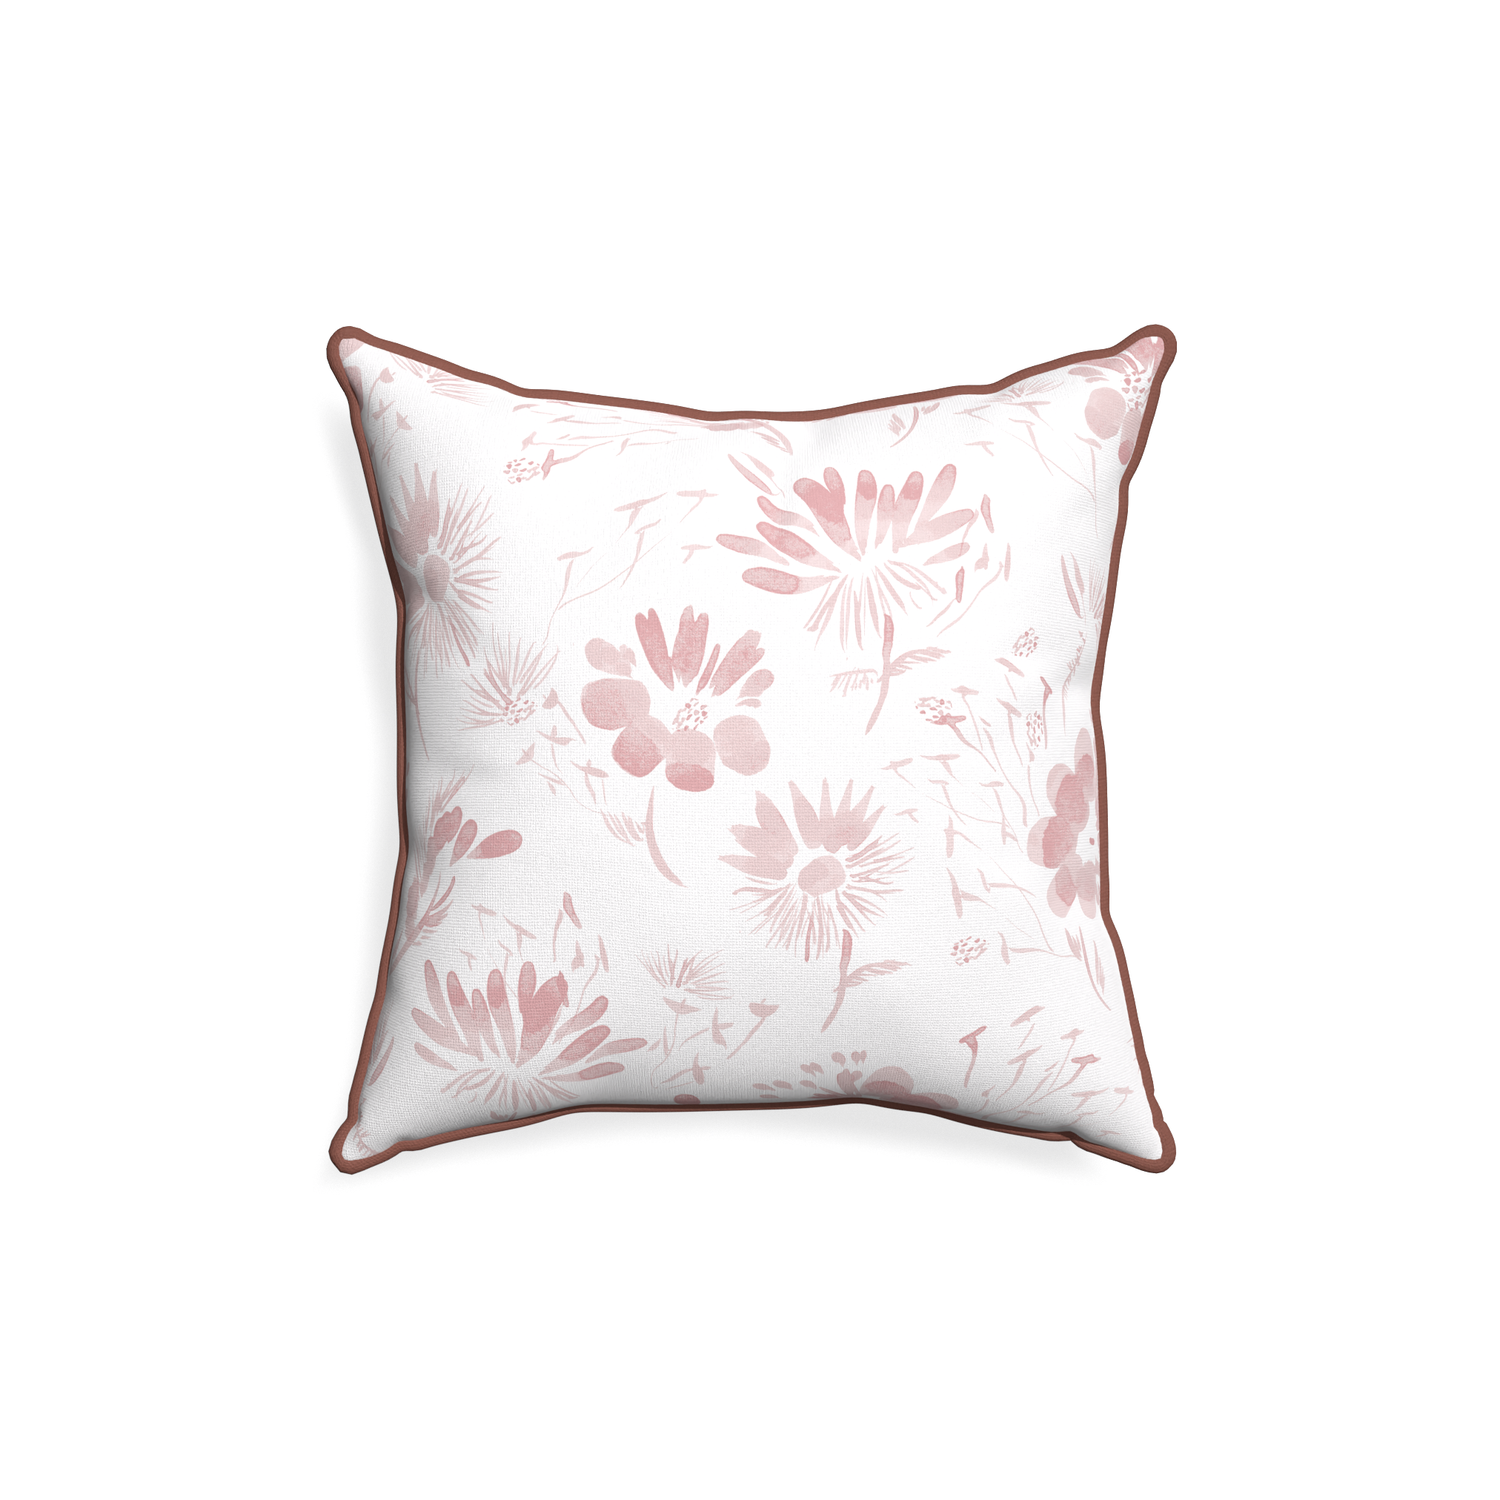 18-square blake custom pink floralpillow with w piping on white background